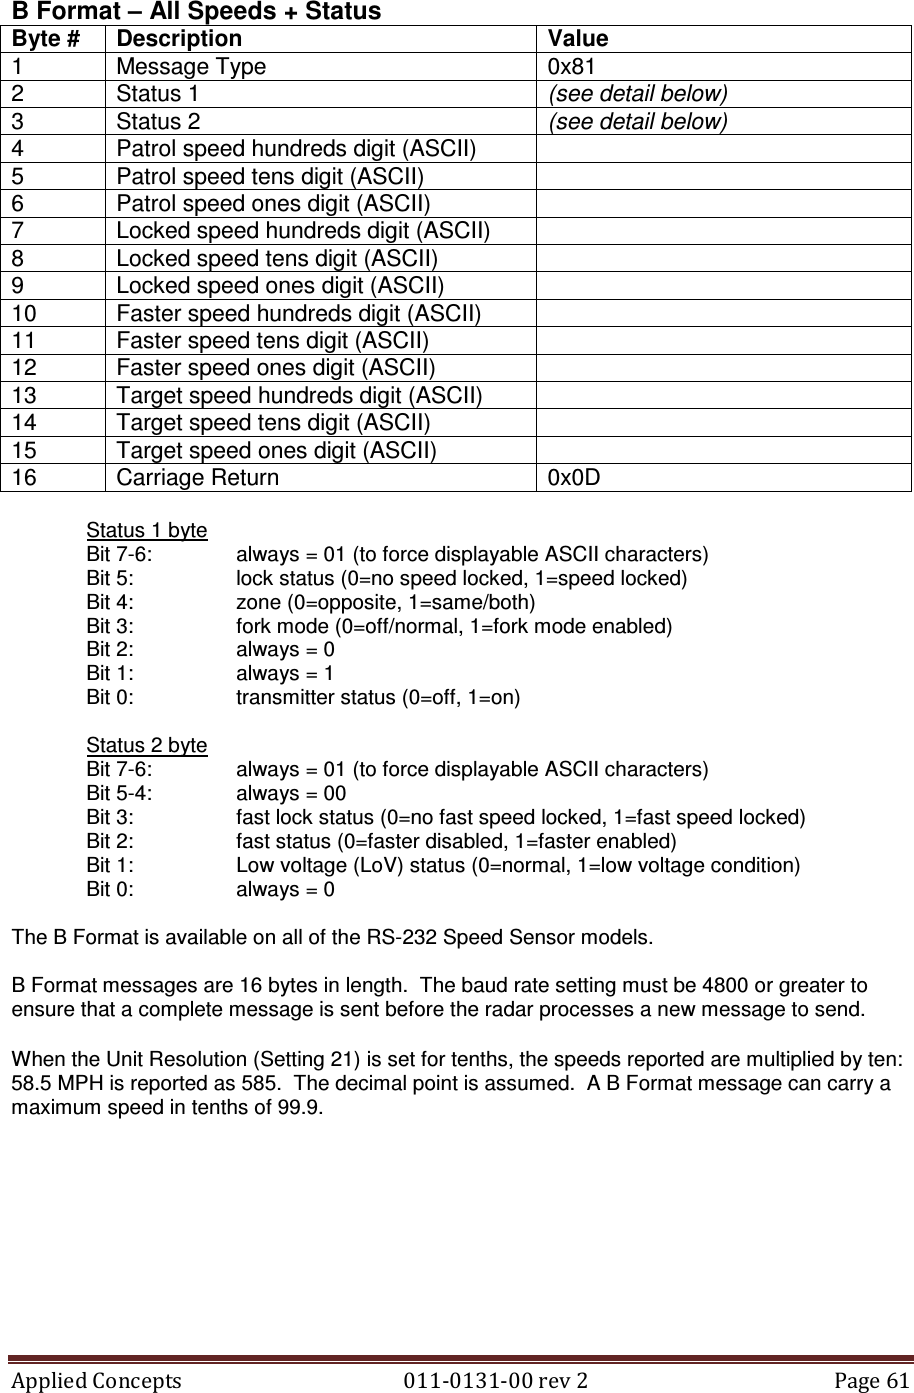 Applied Concepts                                            011-0131-00 rev 2  Page 61  B Format – All Speeds + Status Byte #  Description  Value 1  Message Type  0x81 2  Status 1  (see detail below) 3  Status 2  (see detail below) 4  Patrol speed hundreds digit (ASCII)   5  Patrol speed tens digit (ASCII)   6  Patrol speed ones digit (ASCII)   7  Locked speed hundreds digit (ASCII)   8  Locked speed tens digit (ASCII)   9  Locked speed ones digit (ASCII)   10  Faster speed hundreds digit (ASCII)   11  Faster speed tens digit (ASCII)   12  Faster speed ones digit (ASCII)   13  Target speed hundreds digit (ASCII)   14  Target speed tens digit (ASCII)   15  Target speed ones digit (ASCII)   16  Carriage Return  0x0D  Status 1 byte Bit 7-6:    always = 01 (to force displayable ASCII characters) Bit 5:    lock status (0=no speed locked, 1=speed locked) Bit 4:    zone (0=opposite, 1=same/both) Bit 3:    fork mode (0=off/normal, 1=fork mode enabled) Bit 2:    always = 0 Bit 1:    always = 1 Bit 0:    transmitter status (0=off, 1=on)  Status 2 byte Bit 7-6:    always = 01 (to force displayable ASCII characters) Bit 5-4:    always = 00 Bit 3:    fast lock status (0=no fast speed locked, 1=fast speed locked) Bit 2:    fast status (0=faster disabled, 1=faster enabled) Bit 1:    Low voltage (LoV) status (0=normal, 1=low voltage condition) Bit 0:    always = 0  The B Format is available on all of the RS-232 Speed Sensor models.  B Format messages are 16 bytes in length.  The baud rate setting must be 4800 or greater to ensure that a complete message is sent before the radar processes a new message to send.  When the Unit Resolution (Setting 21) is set for tenths, the speeds reported are multiplied by ten: 58.5 MPH is reported as 585.  The decimal point is assumed.  A B Format message can carry a maximum speed in tenths of 99.9.   